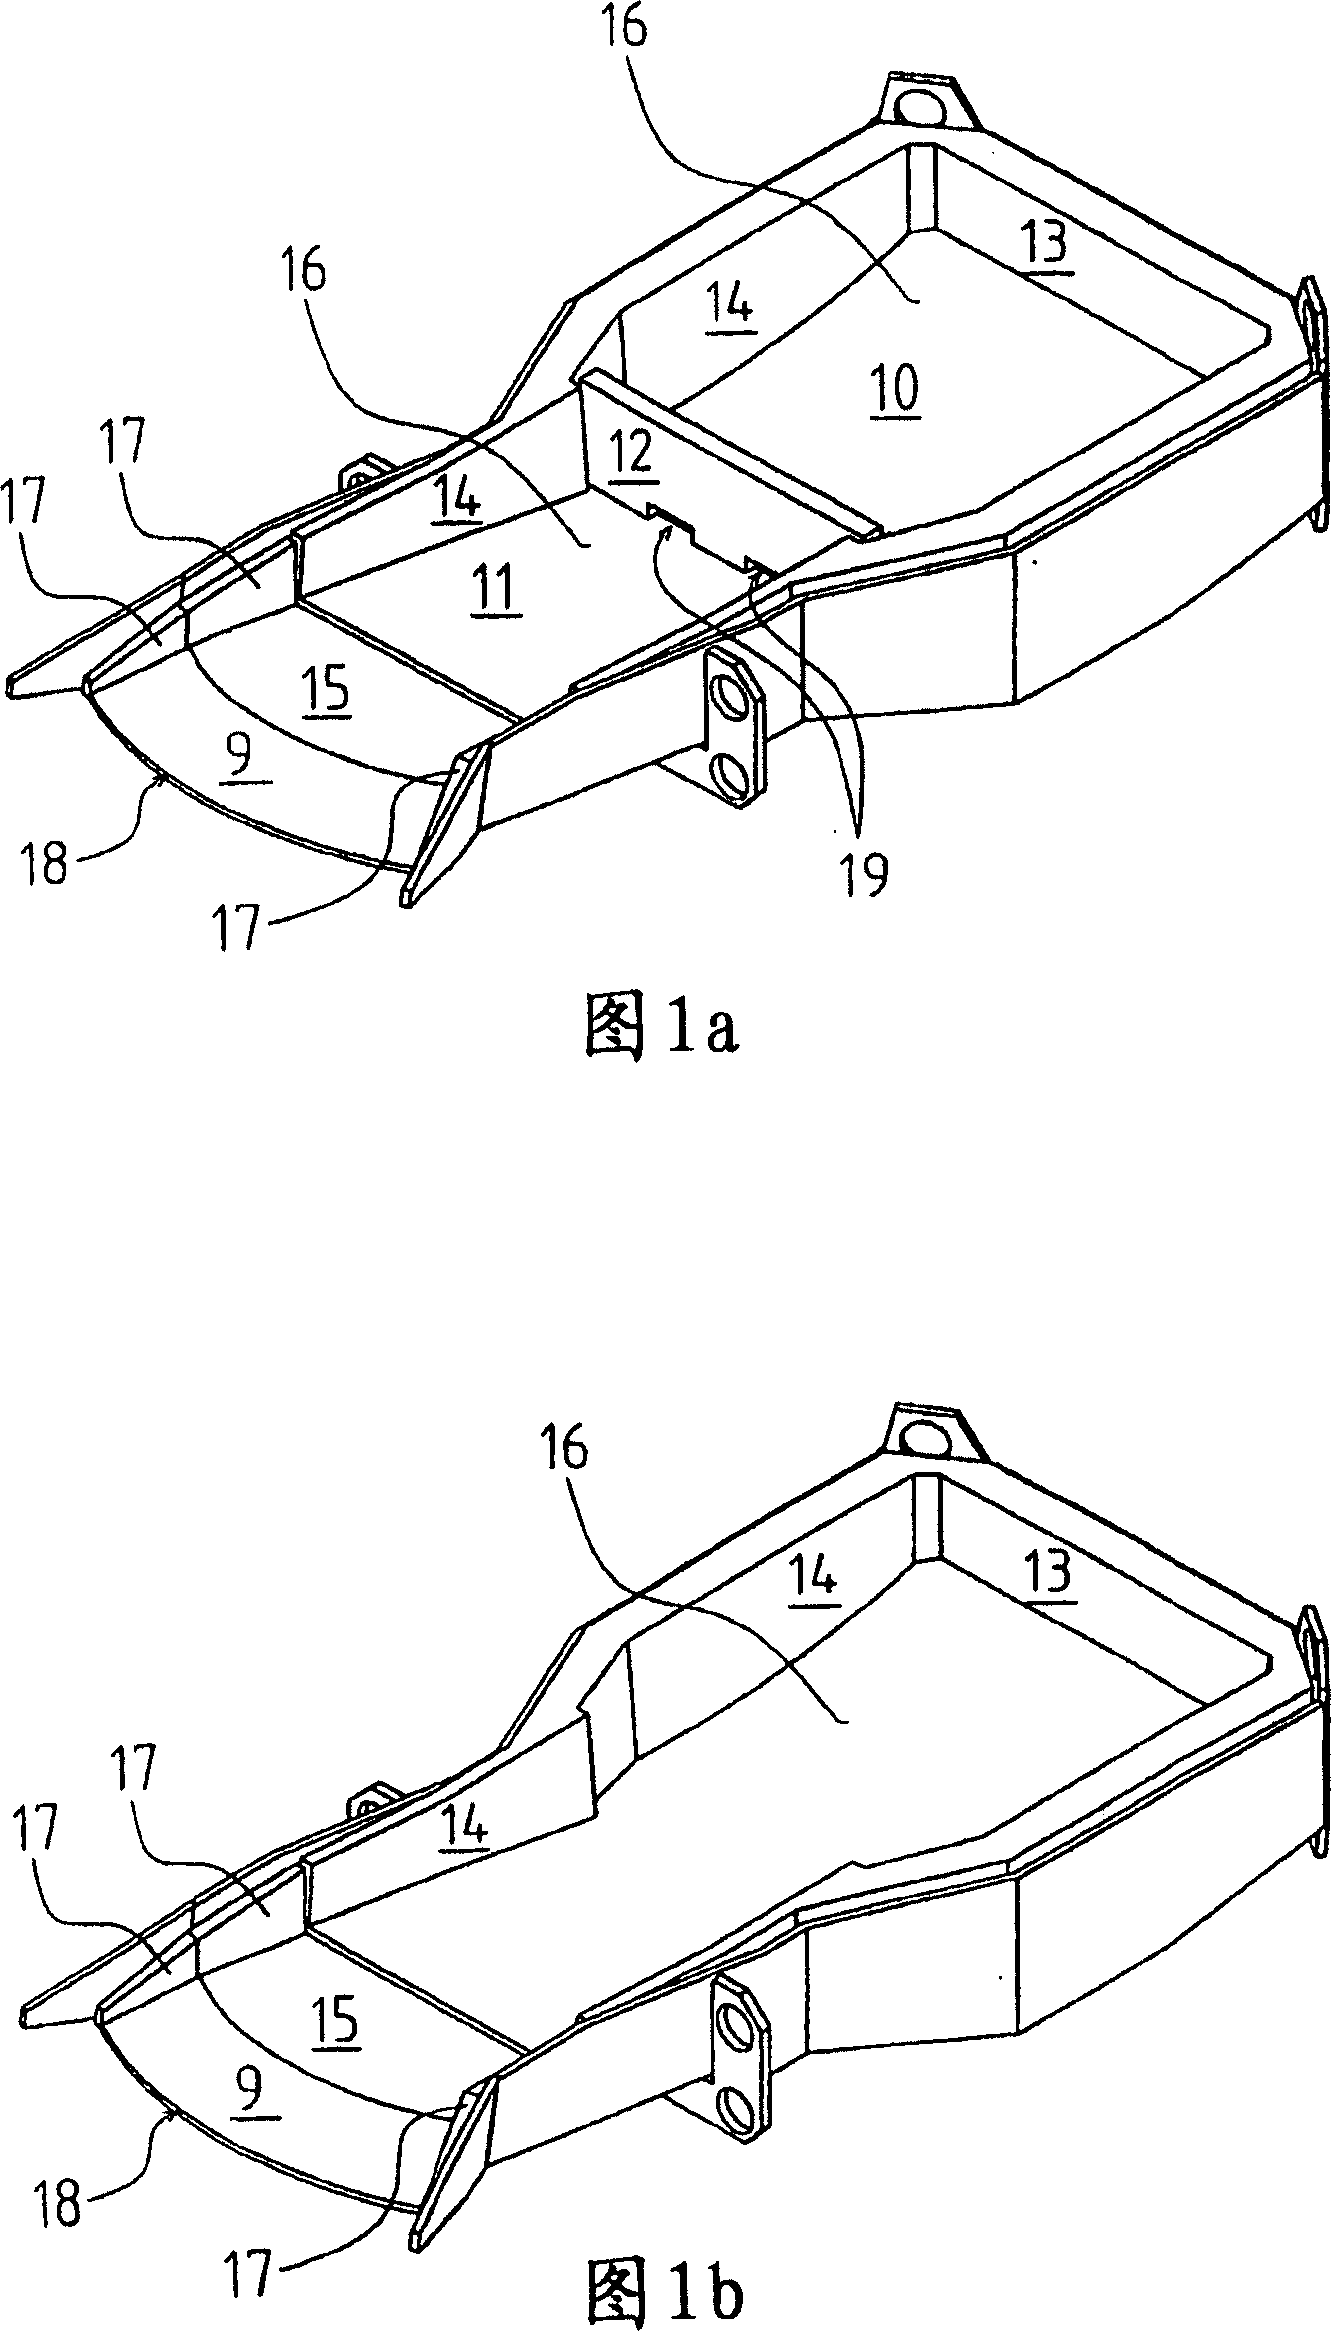 Casting trough and method for casting copper anodes